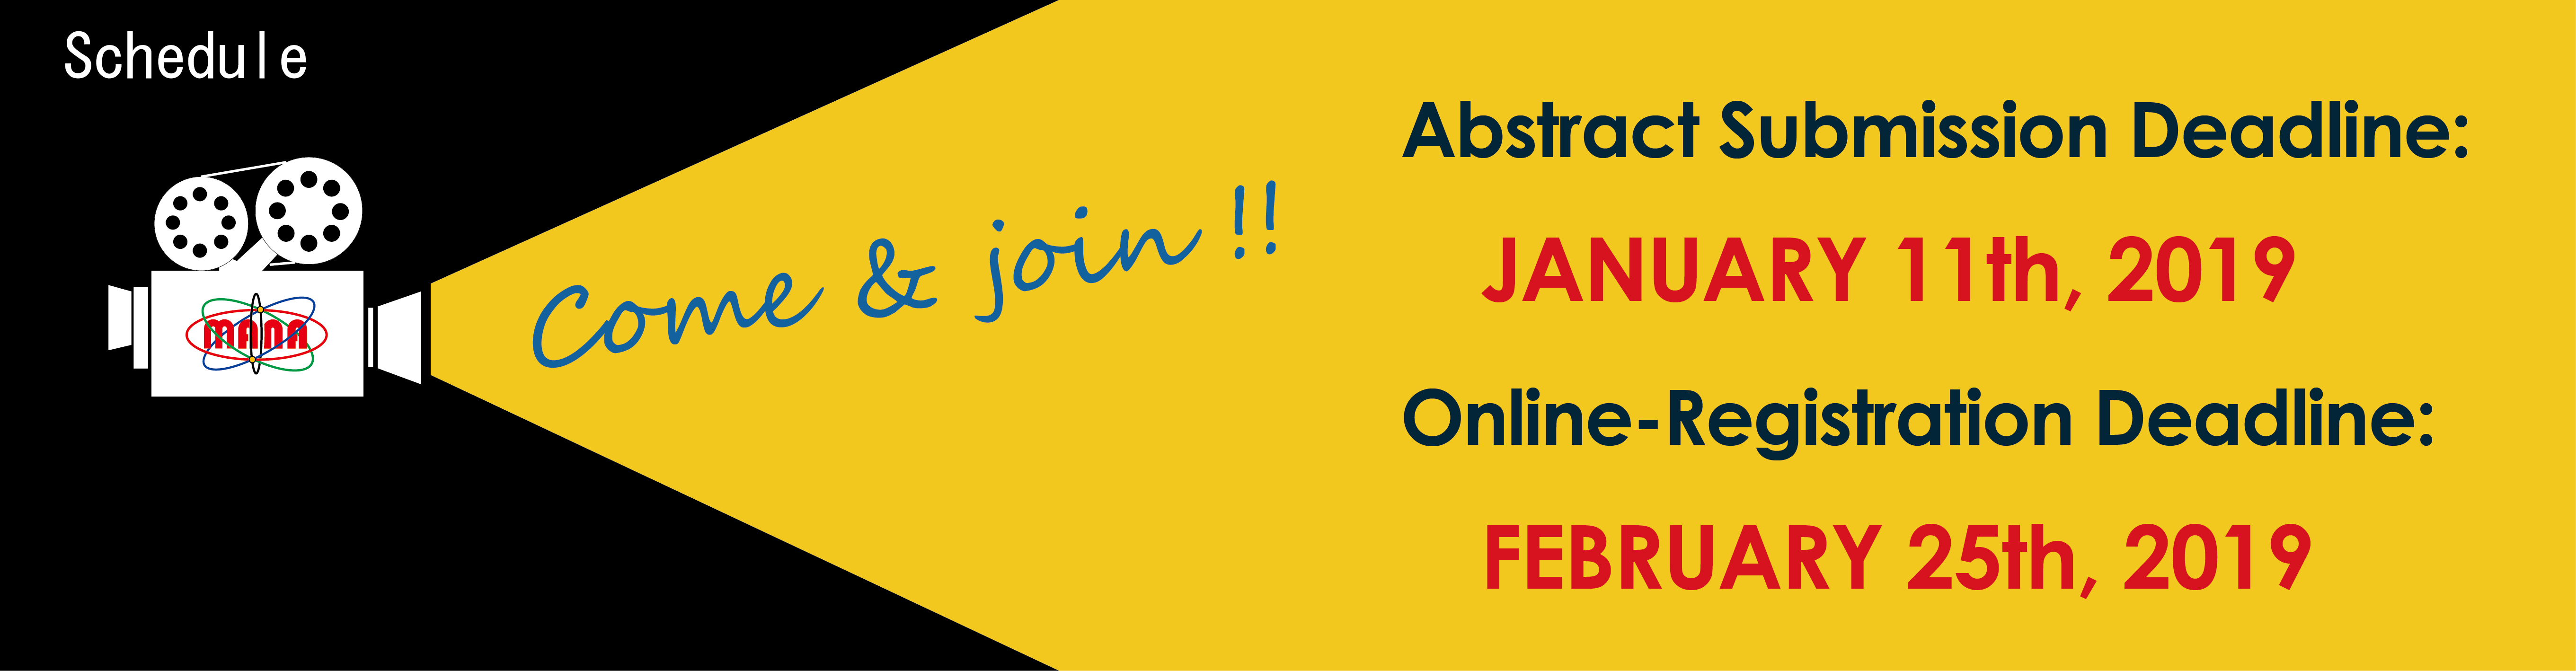 Abstract Submission Deadline: Jan 11th 2019; Online-Registration Deadline: February 28th 2019